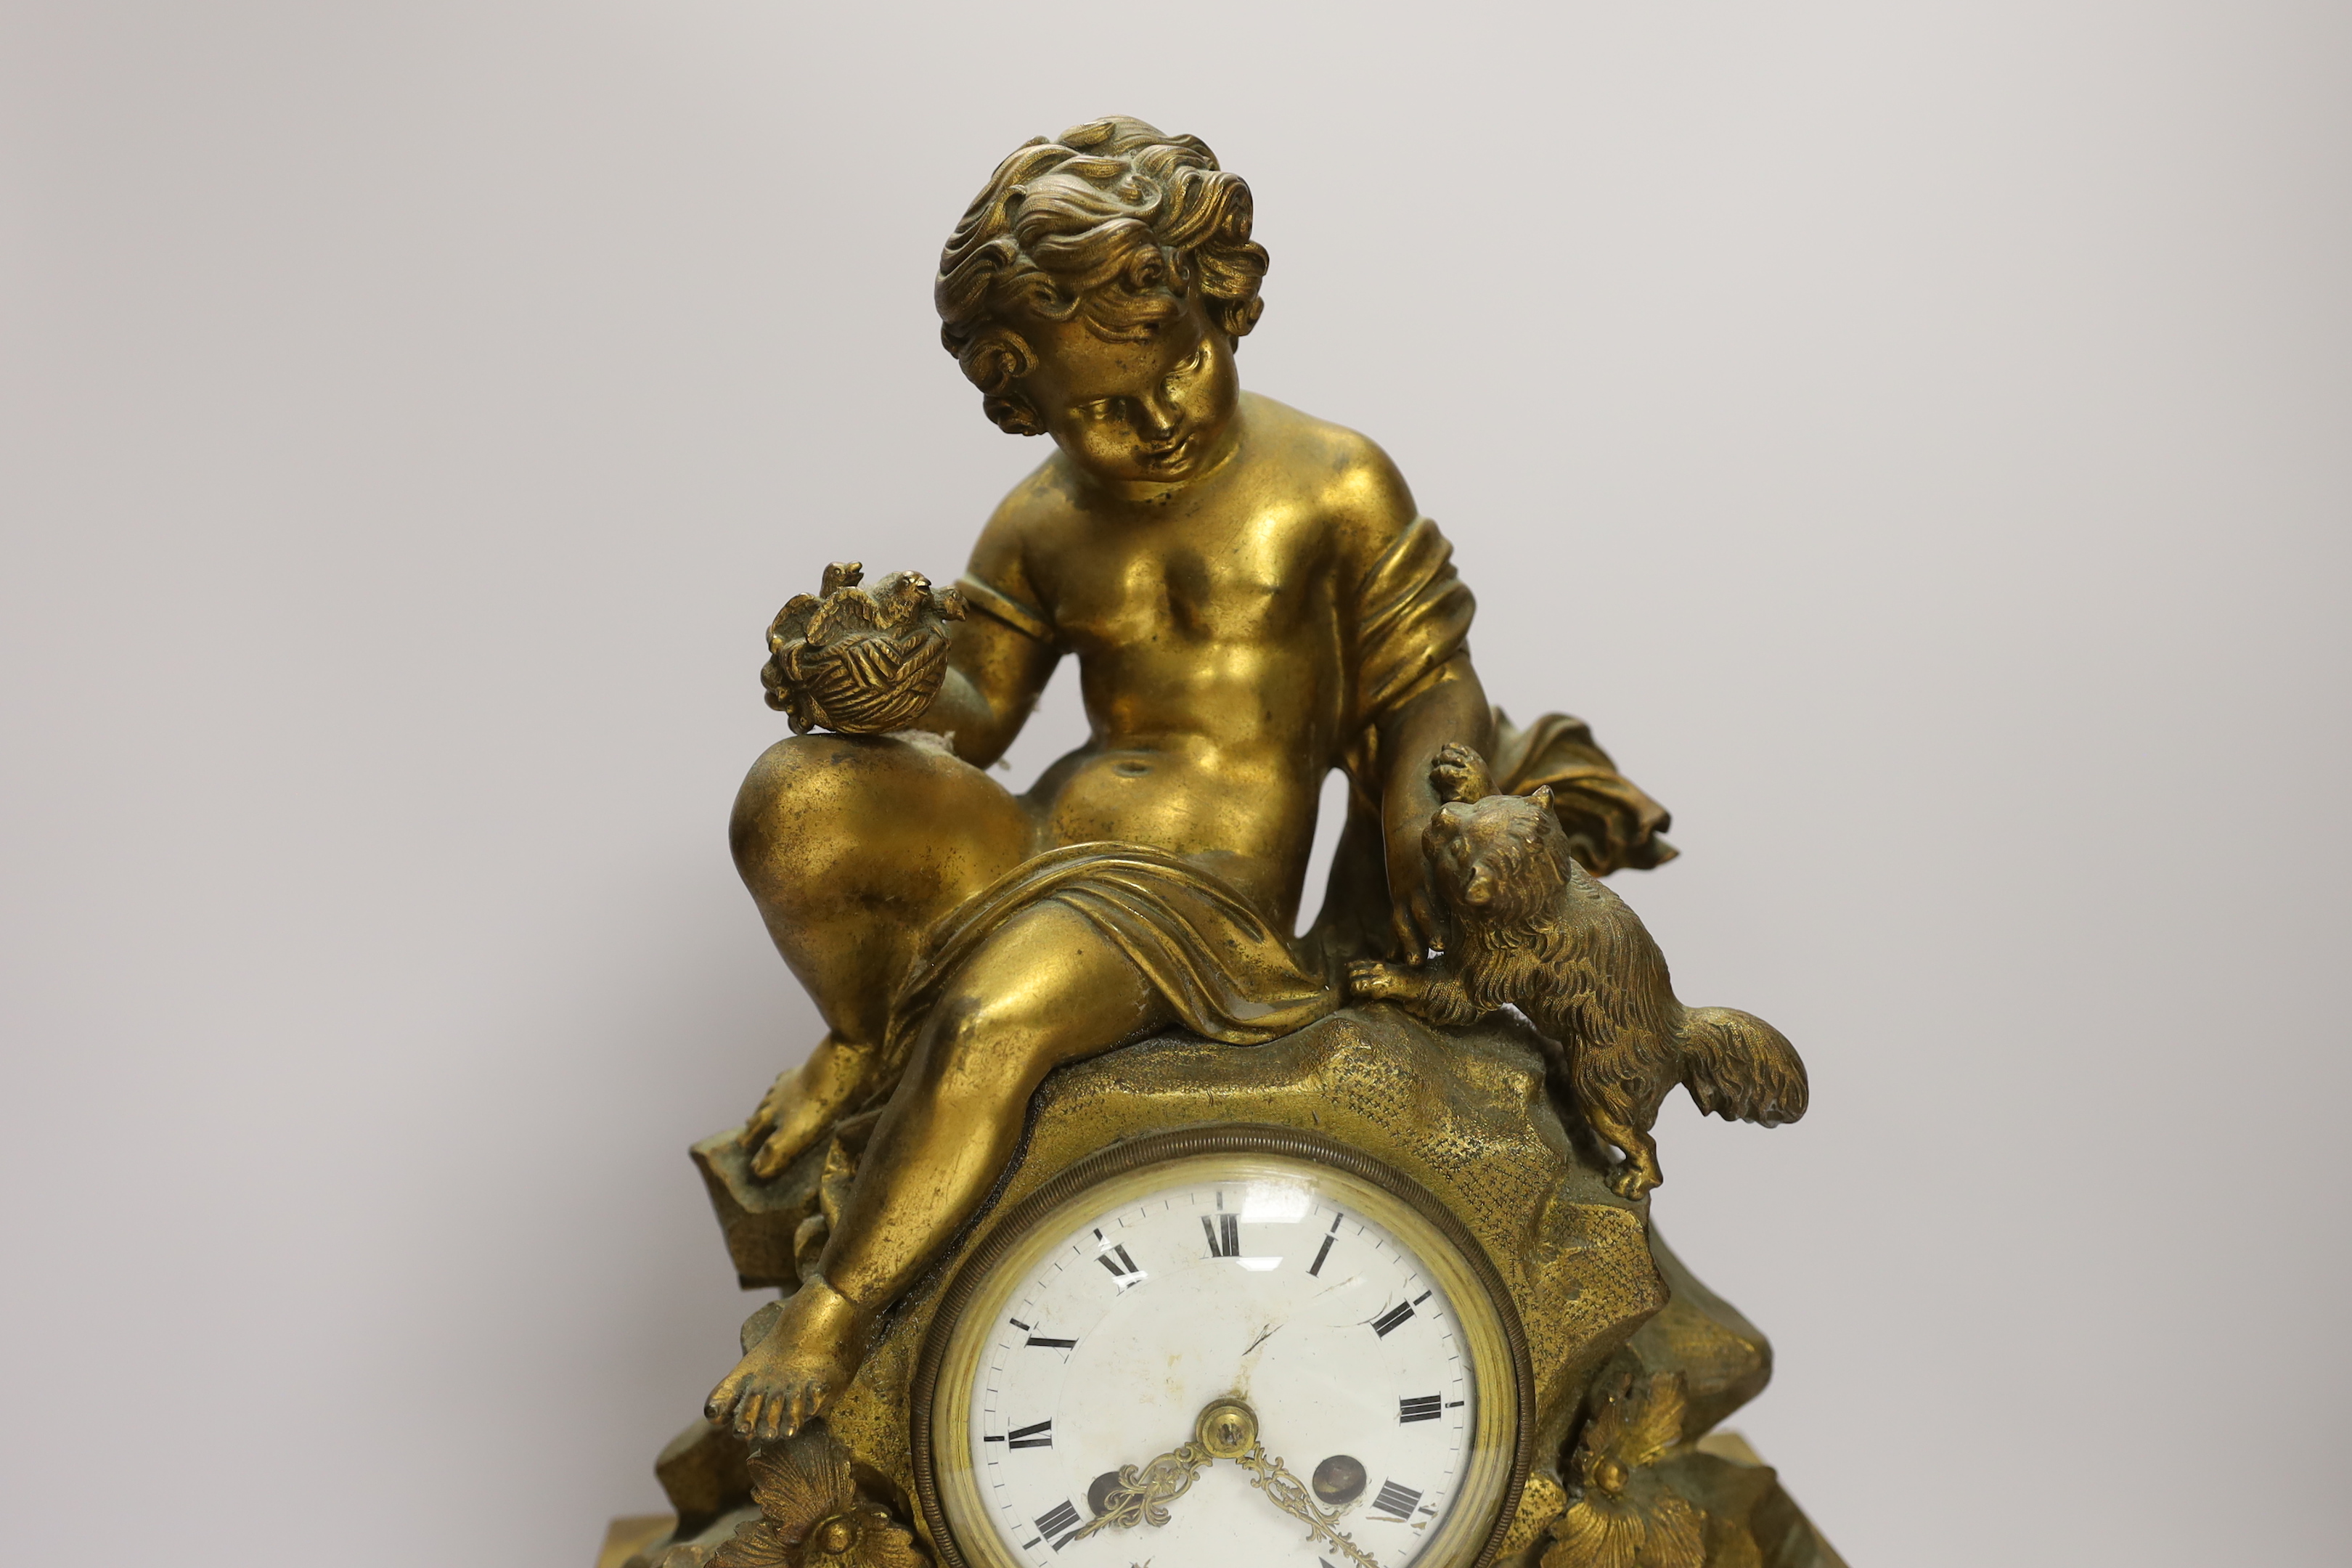 A decorative French ormolu mantel clock, the top a child playing with a kitten and the base with scrolled feet below a swag of flowers, 42cm high